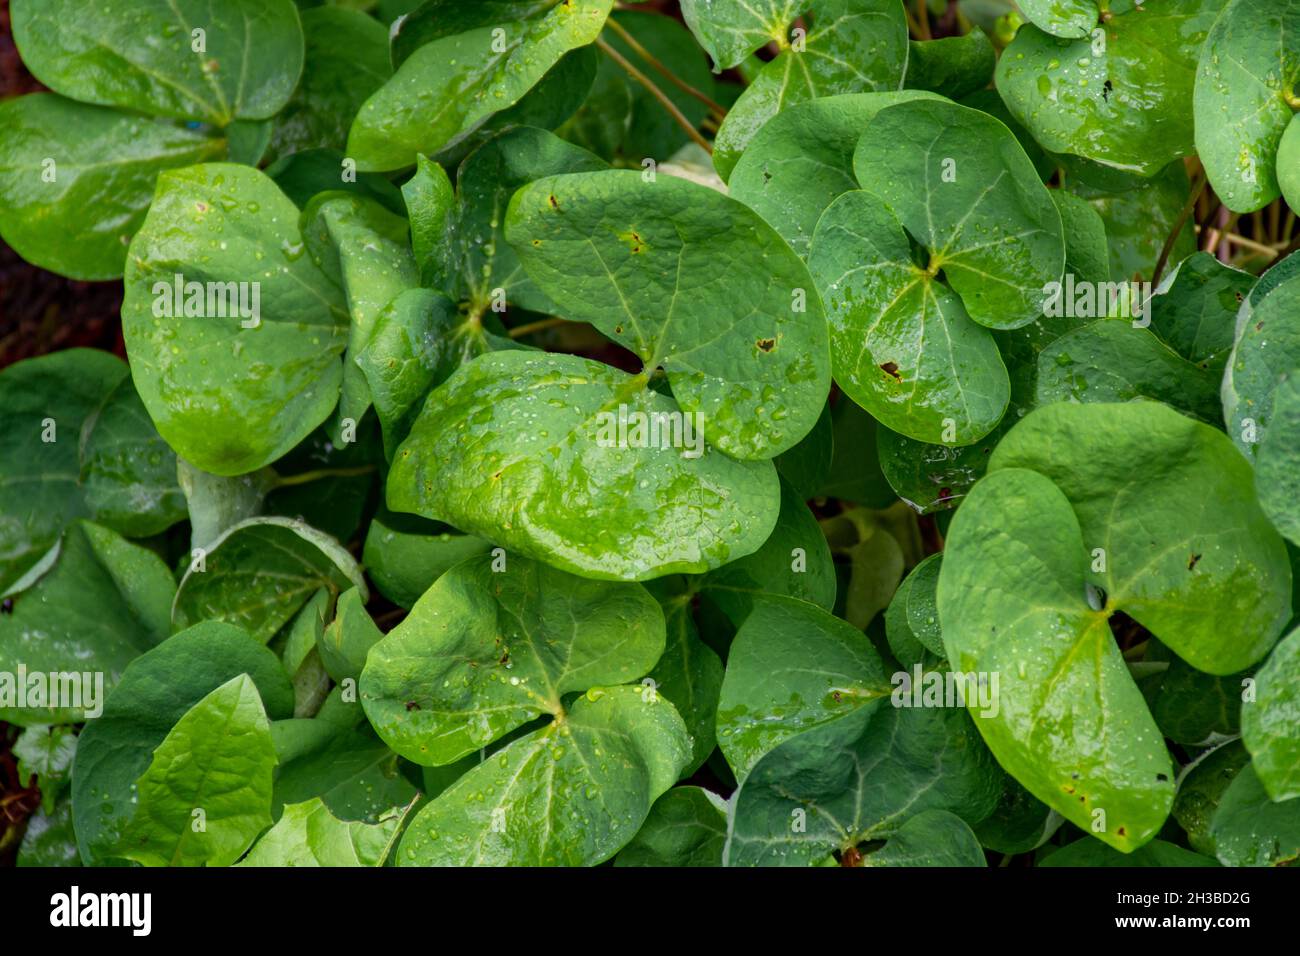 Botanical collection, green leaves of jeffersonia diphylla medicinal plant close up Stock Photo